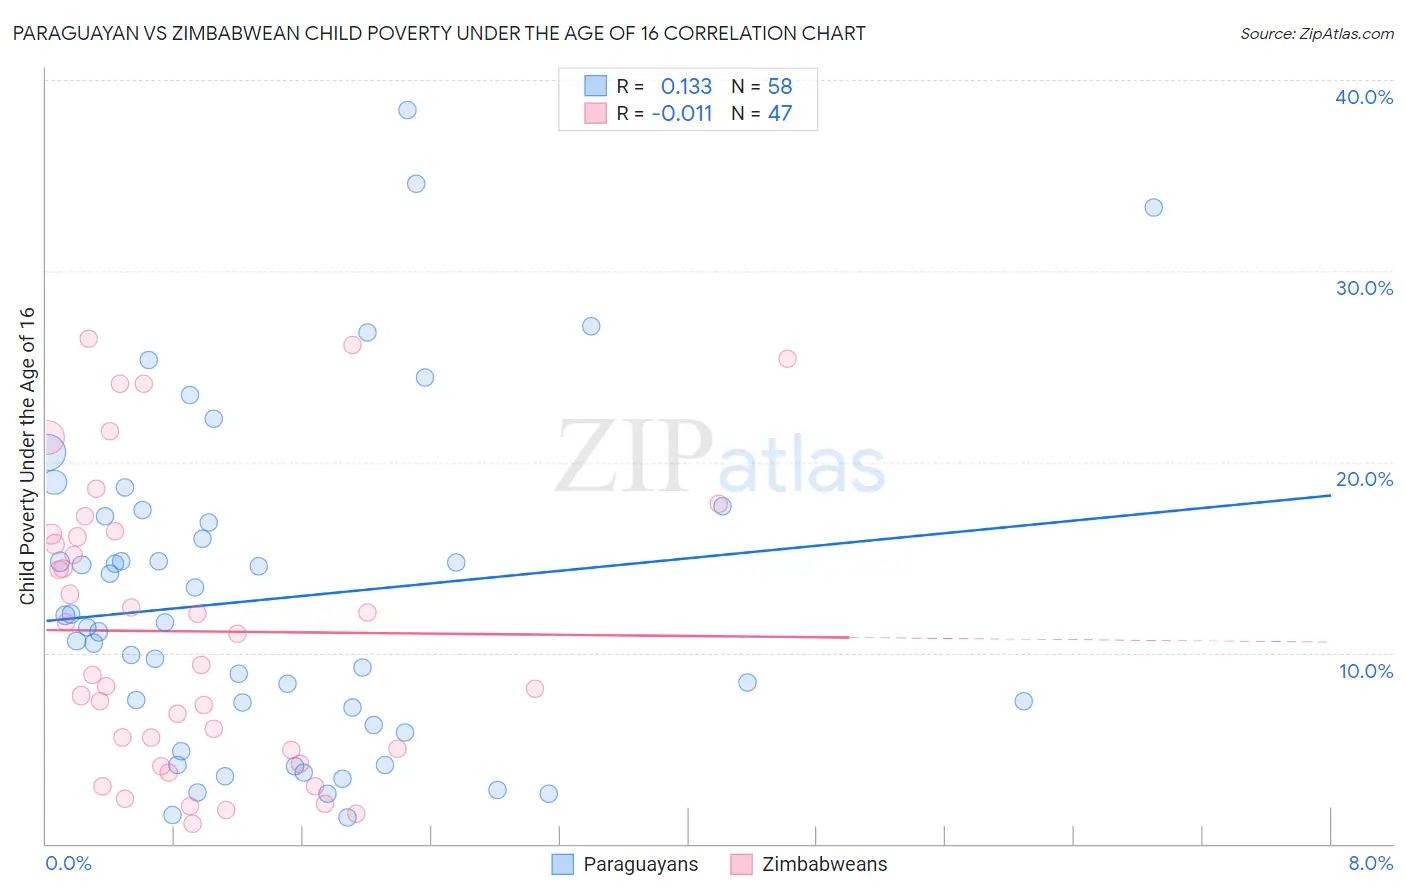 Paraguayan vs Zimbabwean Child Poverty Under the Age of 16